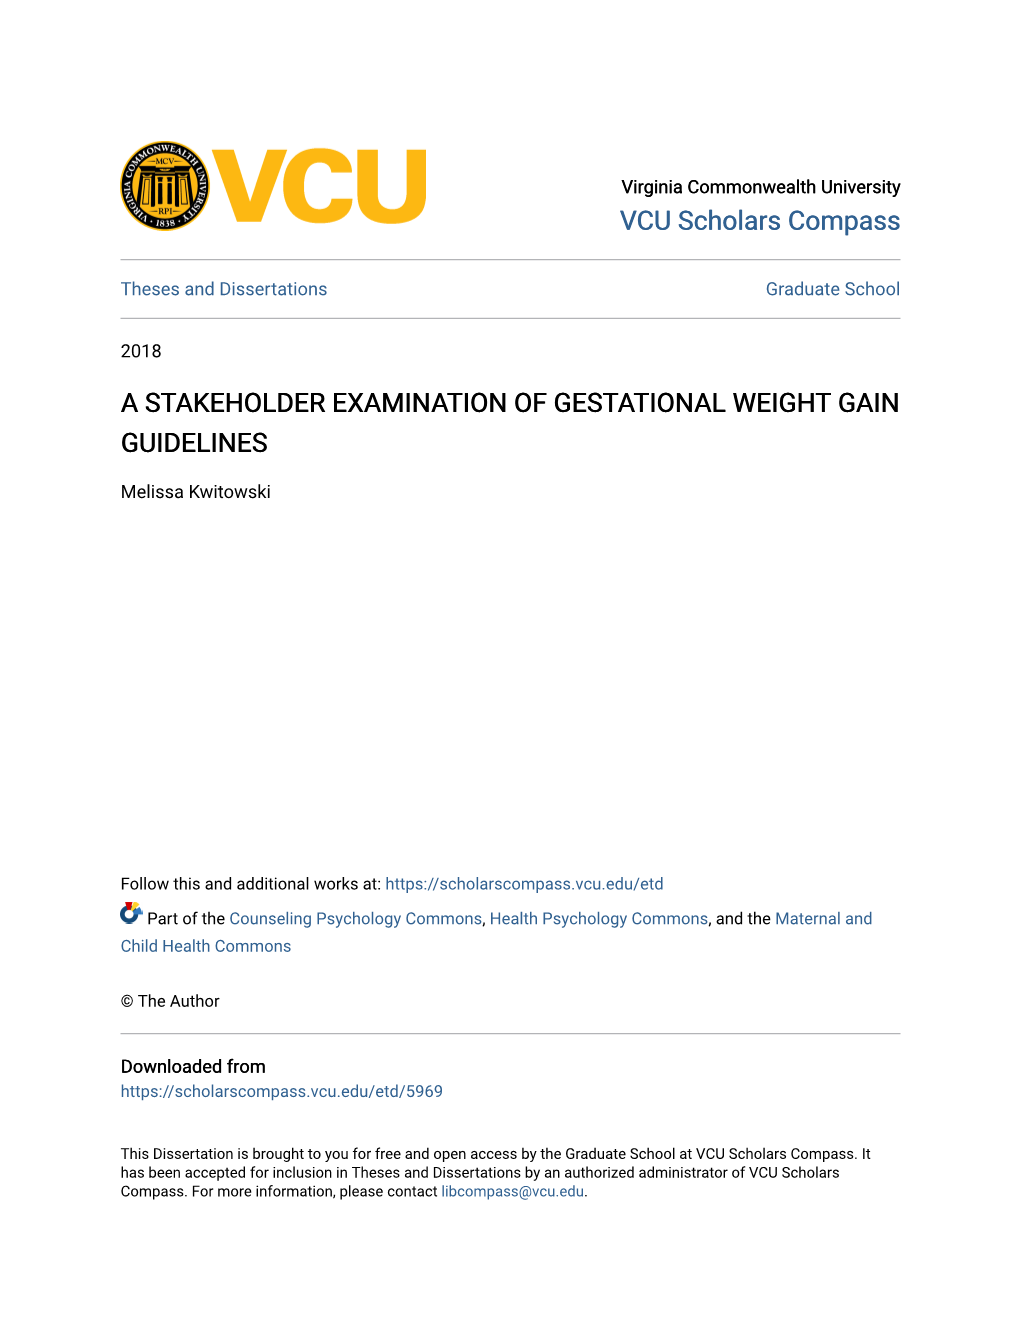 A Stakeholder Examination of Gestational Weight Gain Guidelines